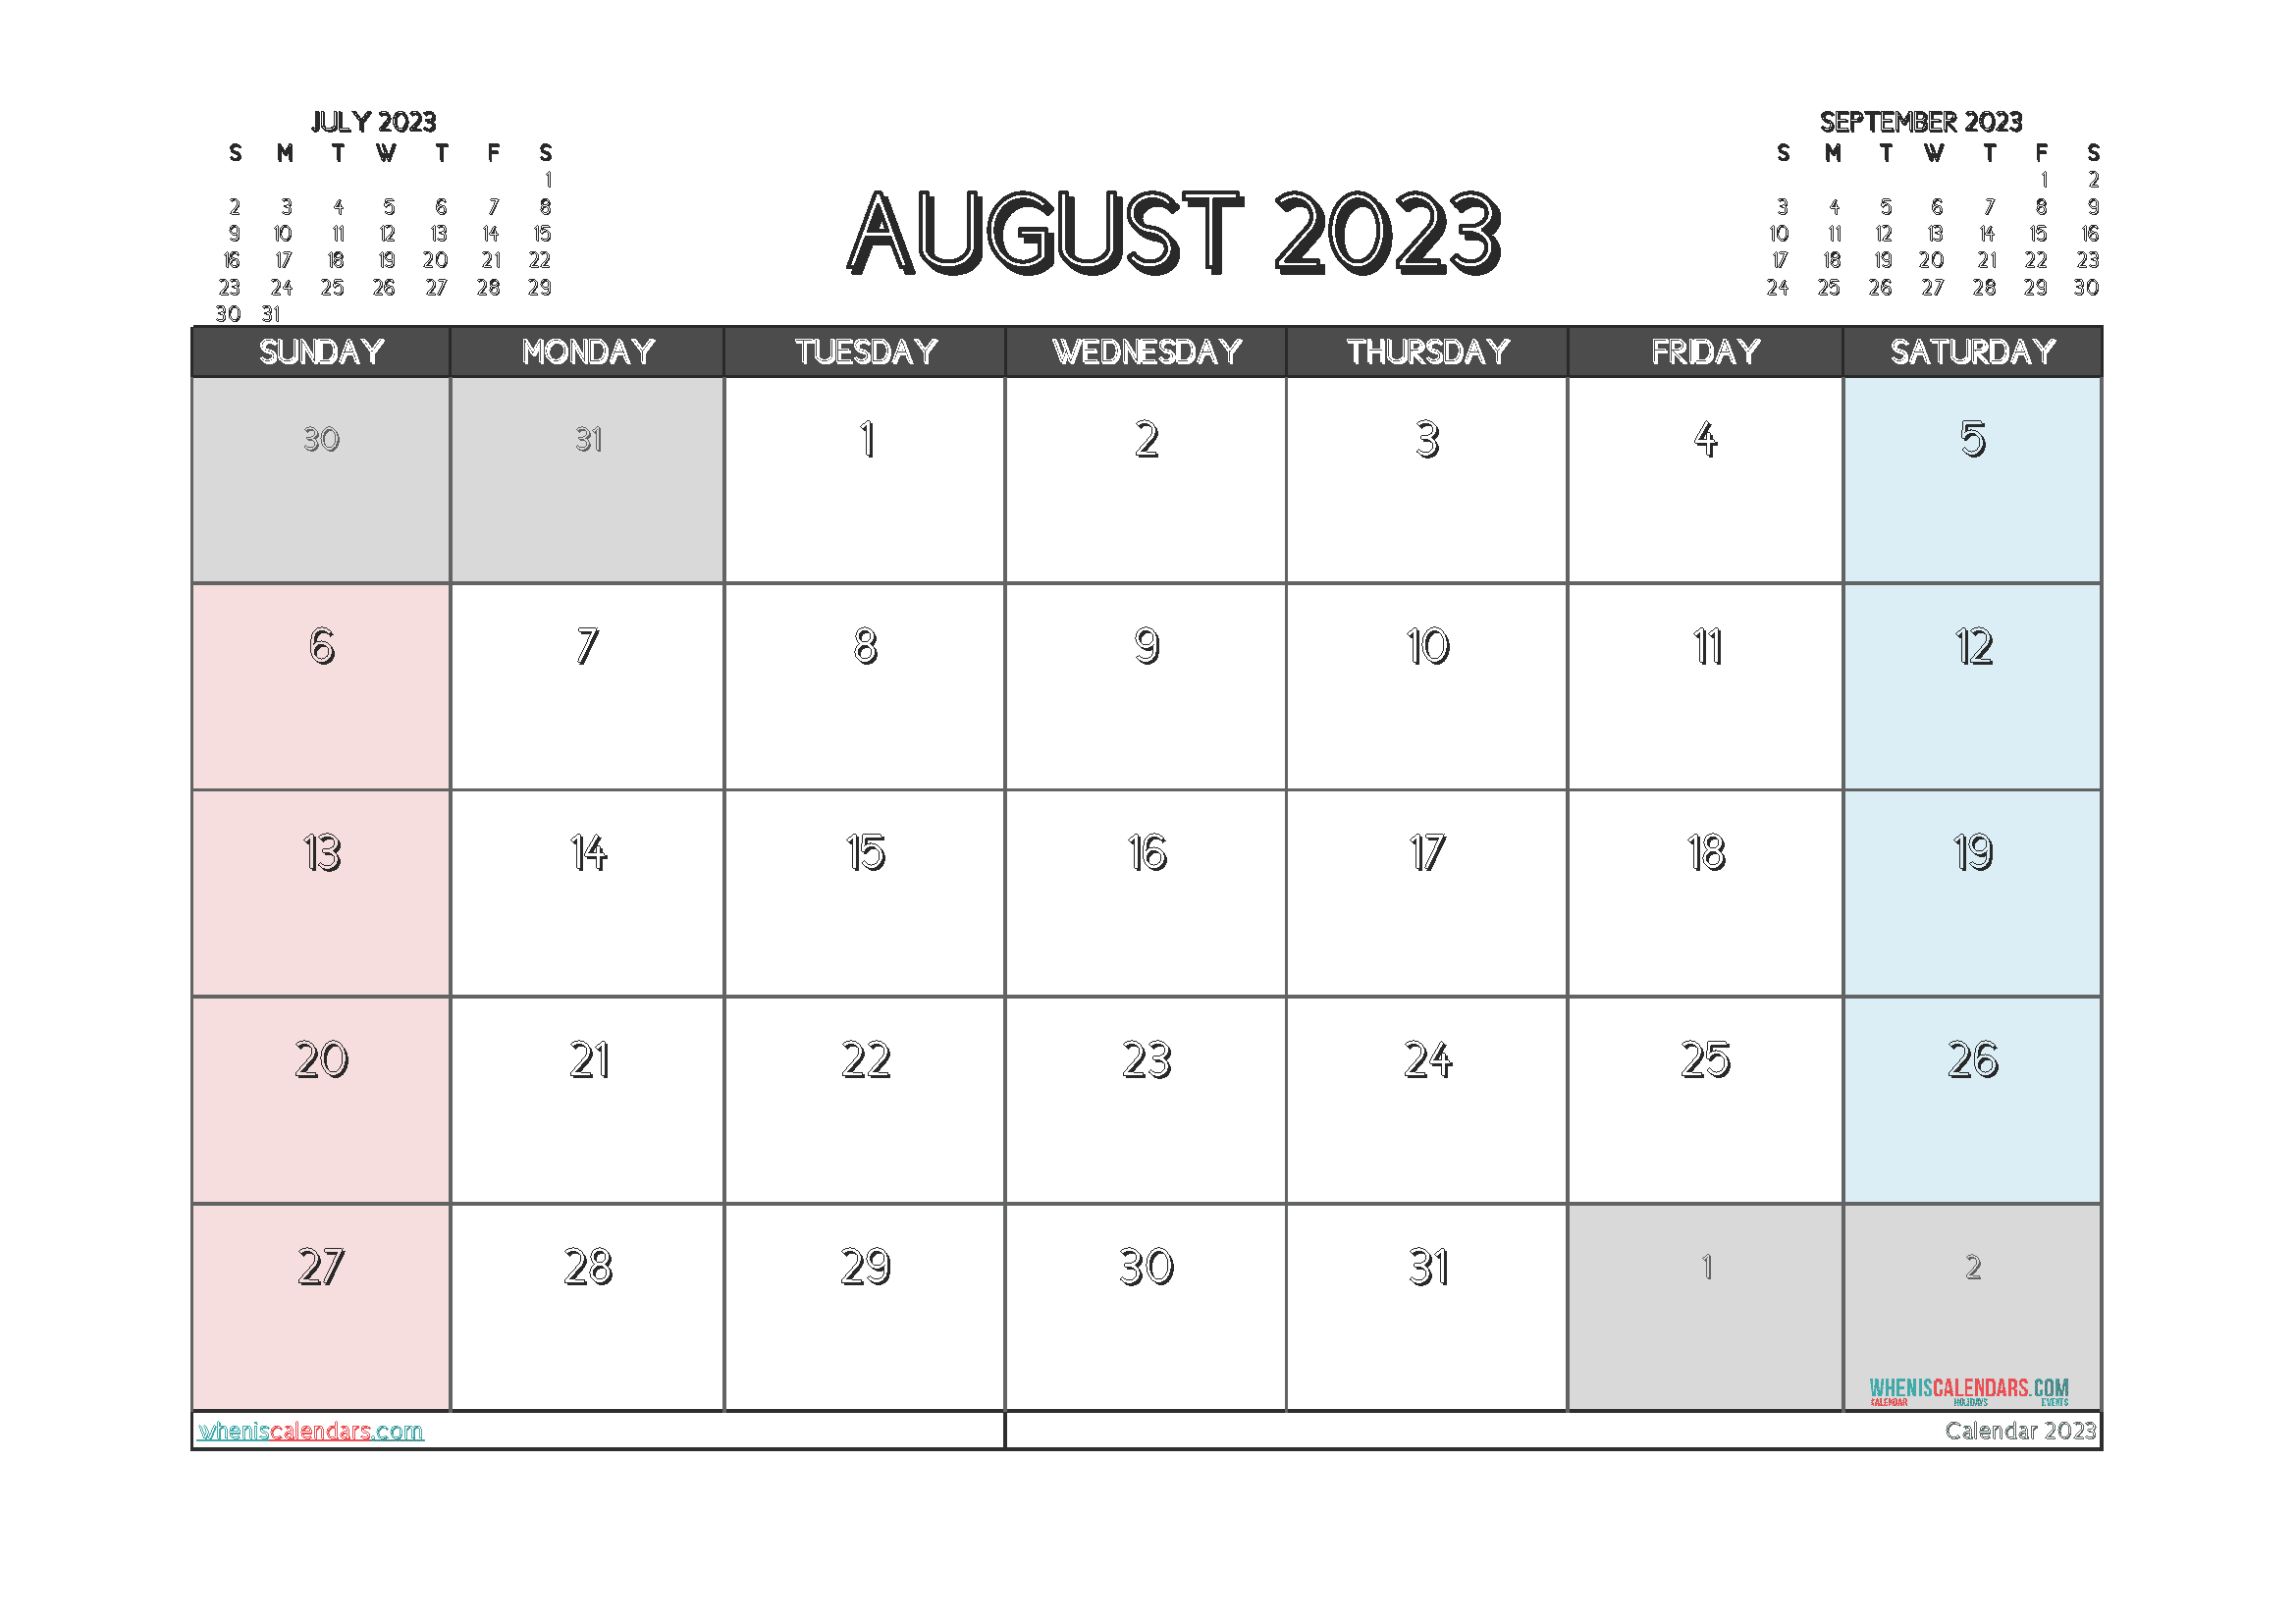 Free Printable Calendar 2023 August with Holidays PDF in Landscape